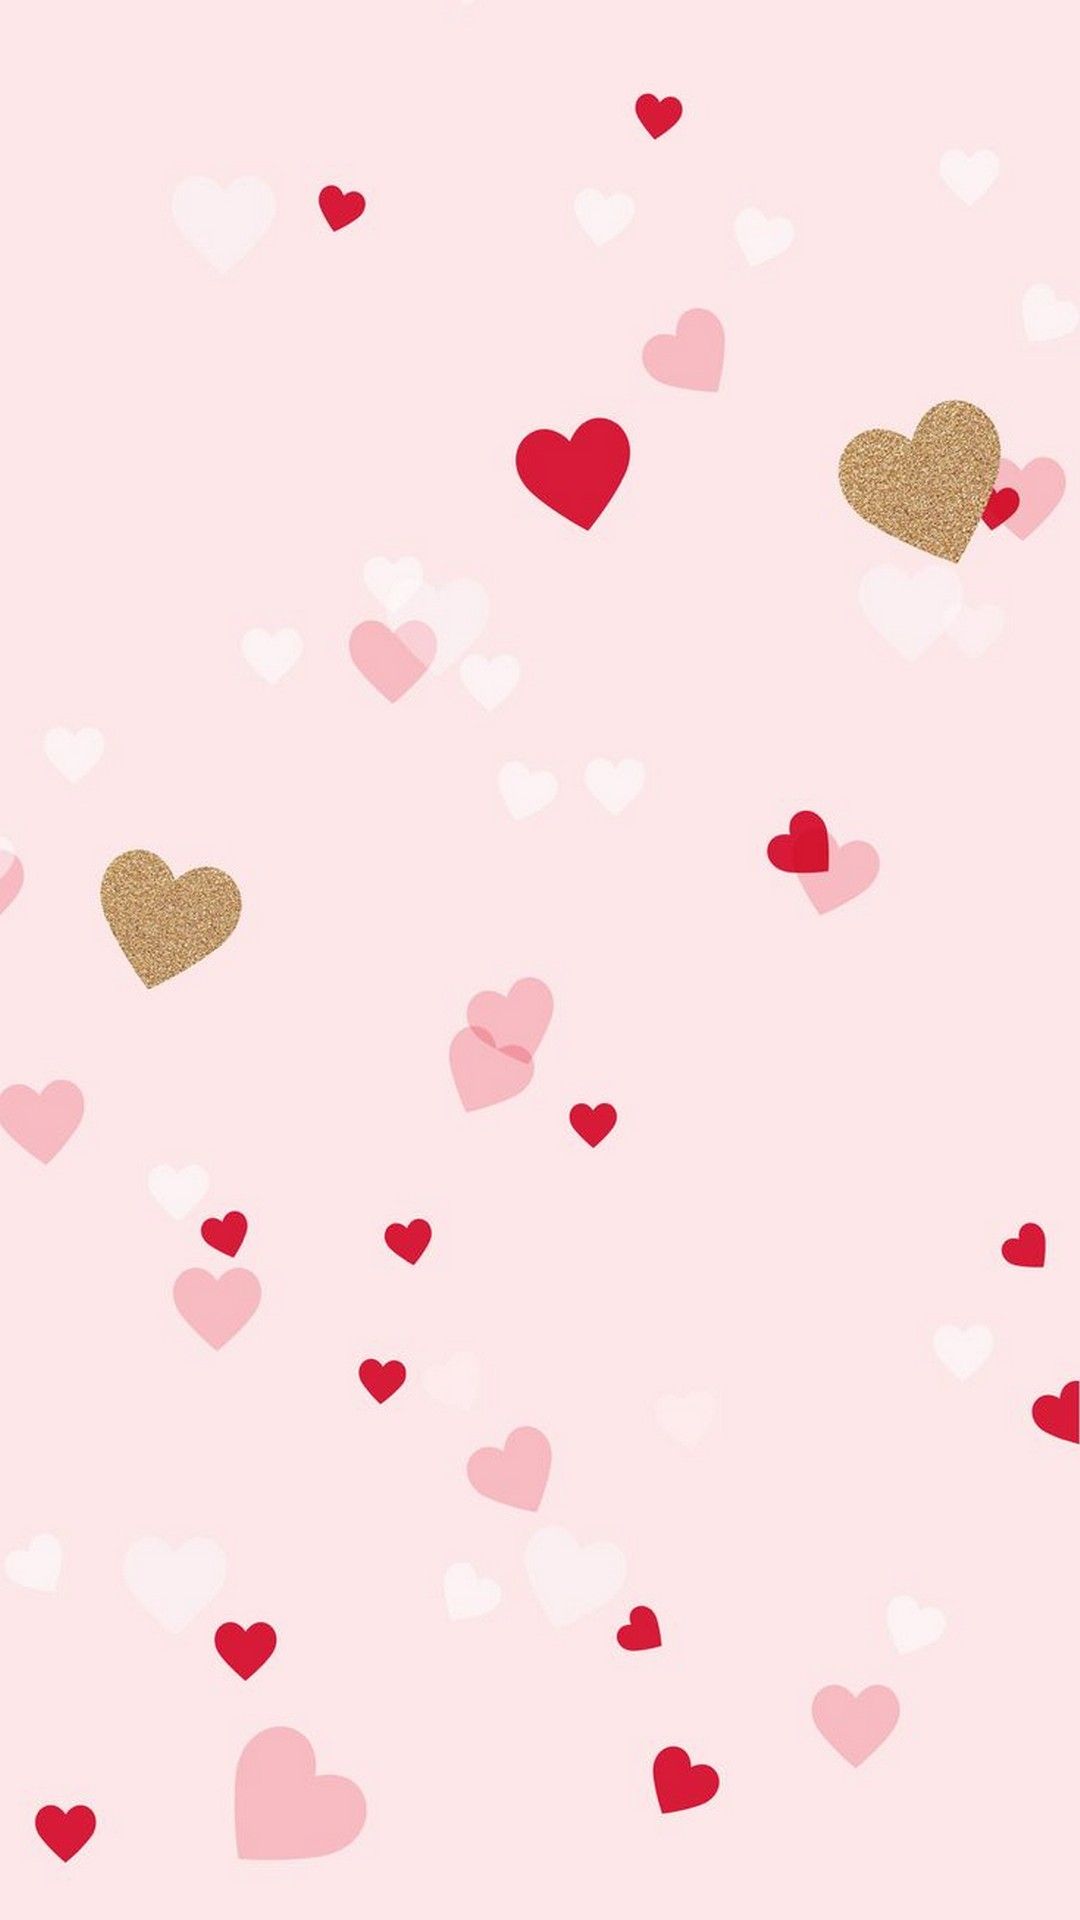 Valentine Wallpaper For iPhone iPhoneWallpapers Cute iphone